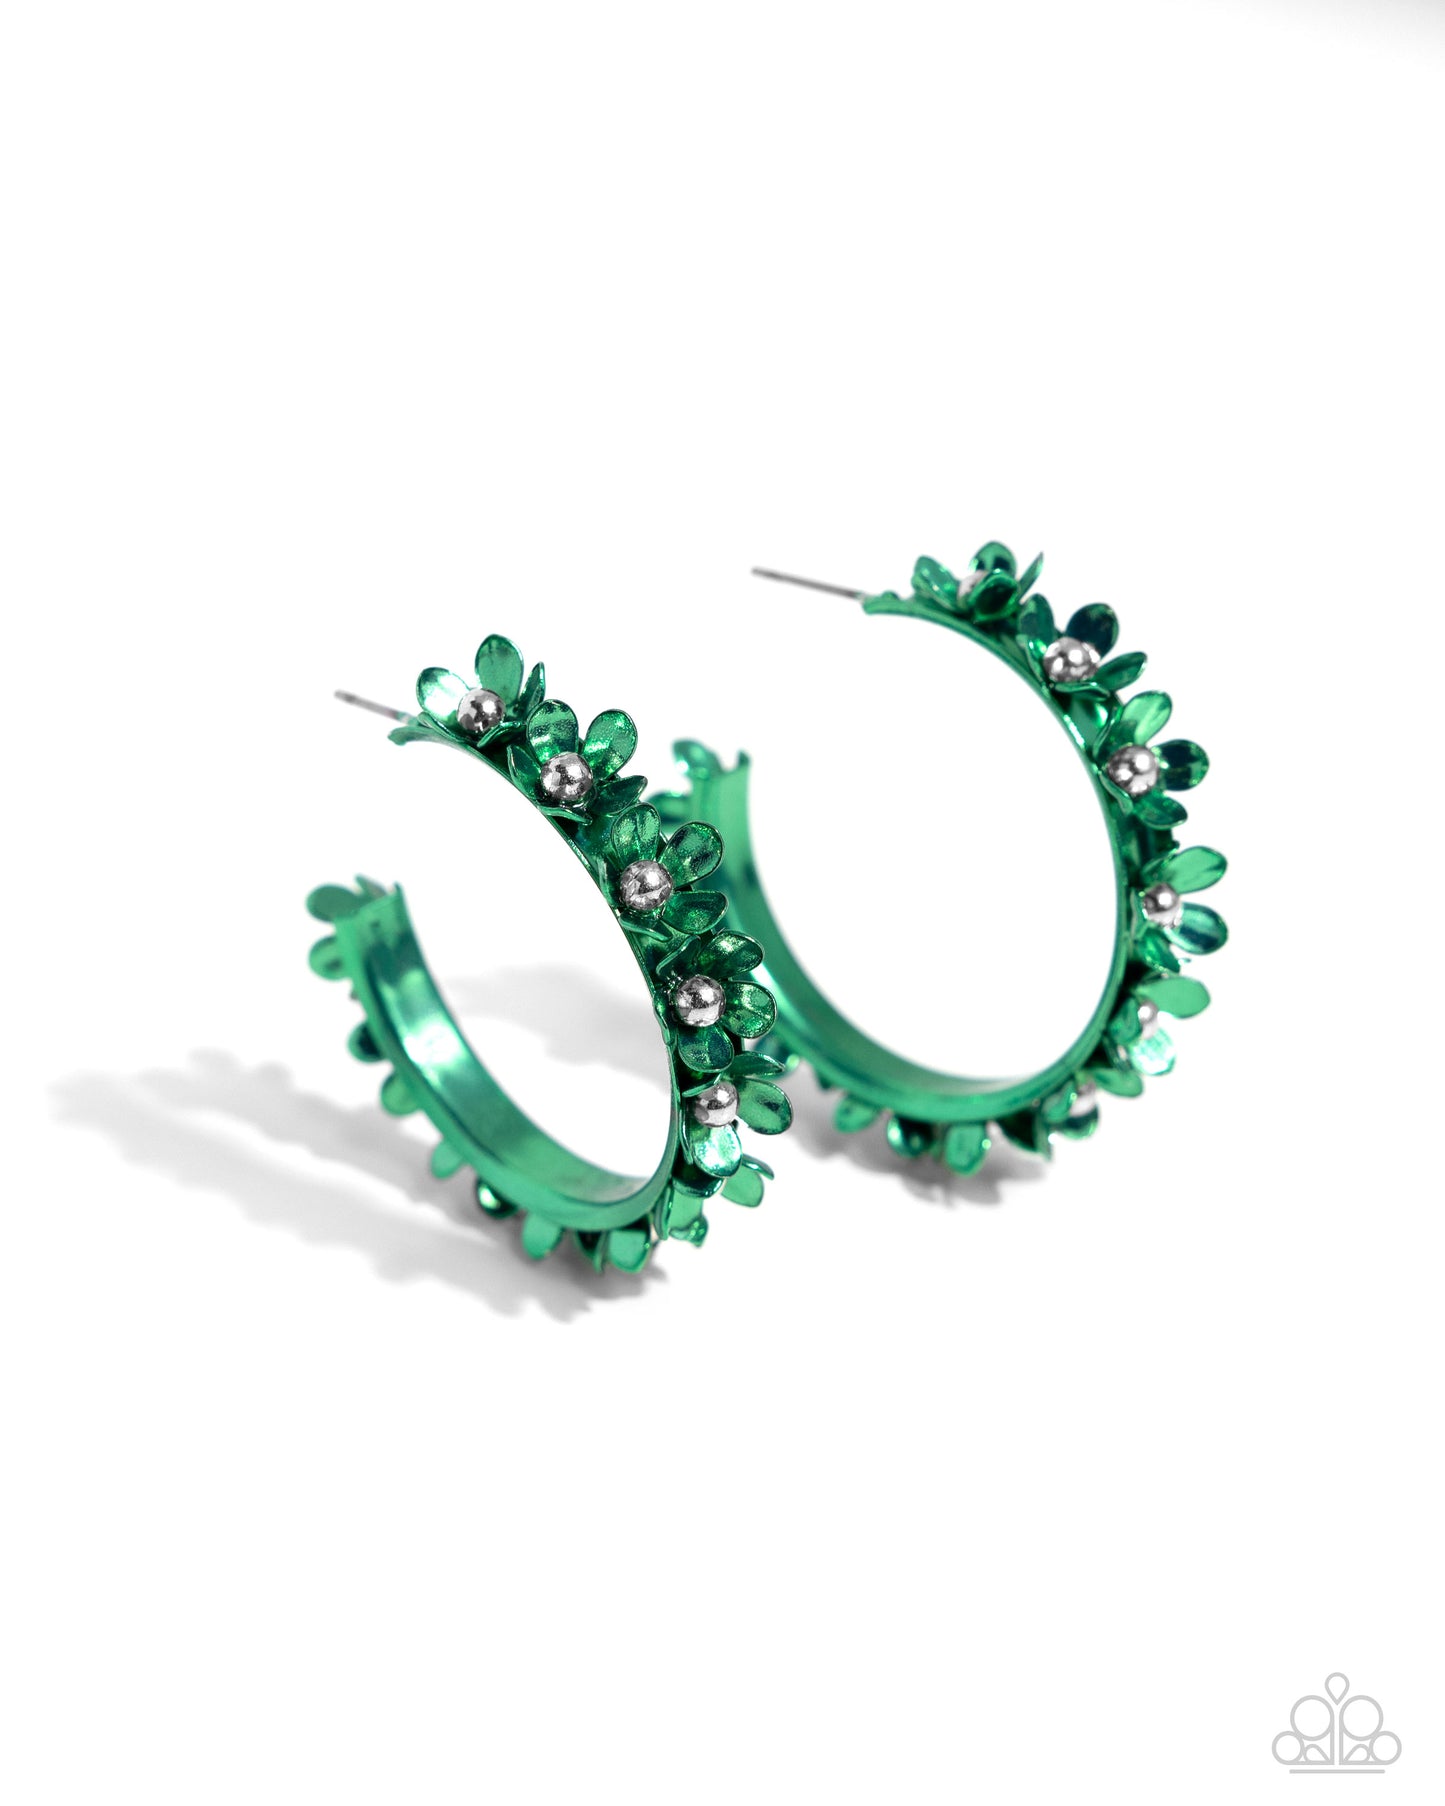 Fashionable Flower Crown Green Hoop Earring - Paparazzi Accessories Dipped in an emerald hue, a hollowed-out hoop curls around the ear. Featuring silver beaded centers, metallic emerald flowers bloom along the curl of the hollow of the hoop for a fashionable display. Earring attaches to a standard post fitting. Hoop measures approximately 1 1/4" in diameter. Sold as one pair of hoop earrings. SKU: P5HO-GRXX-035XX